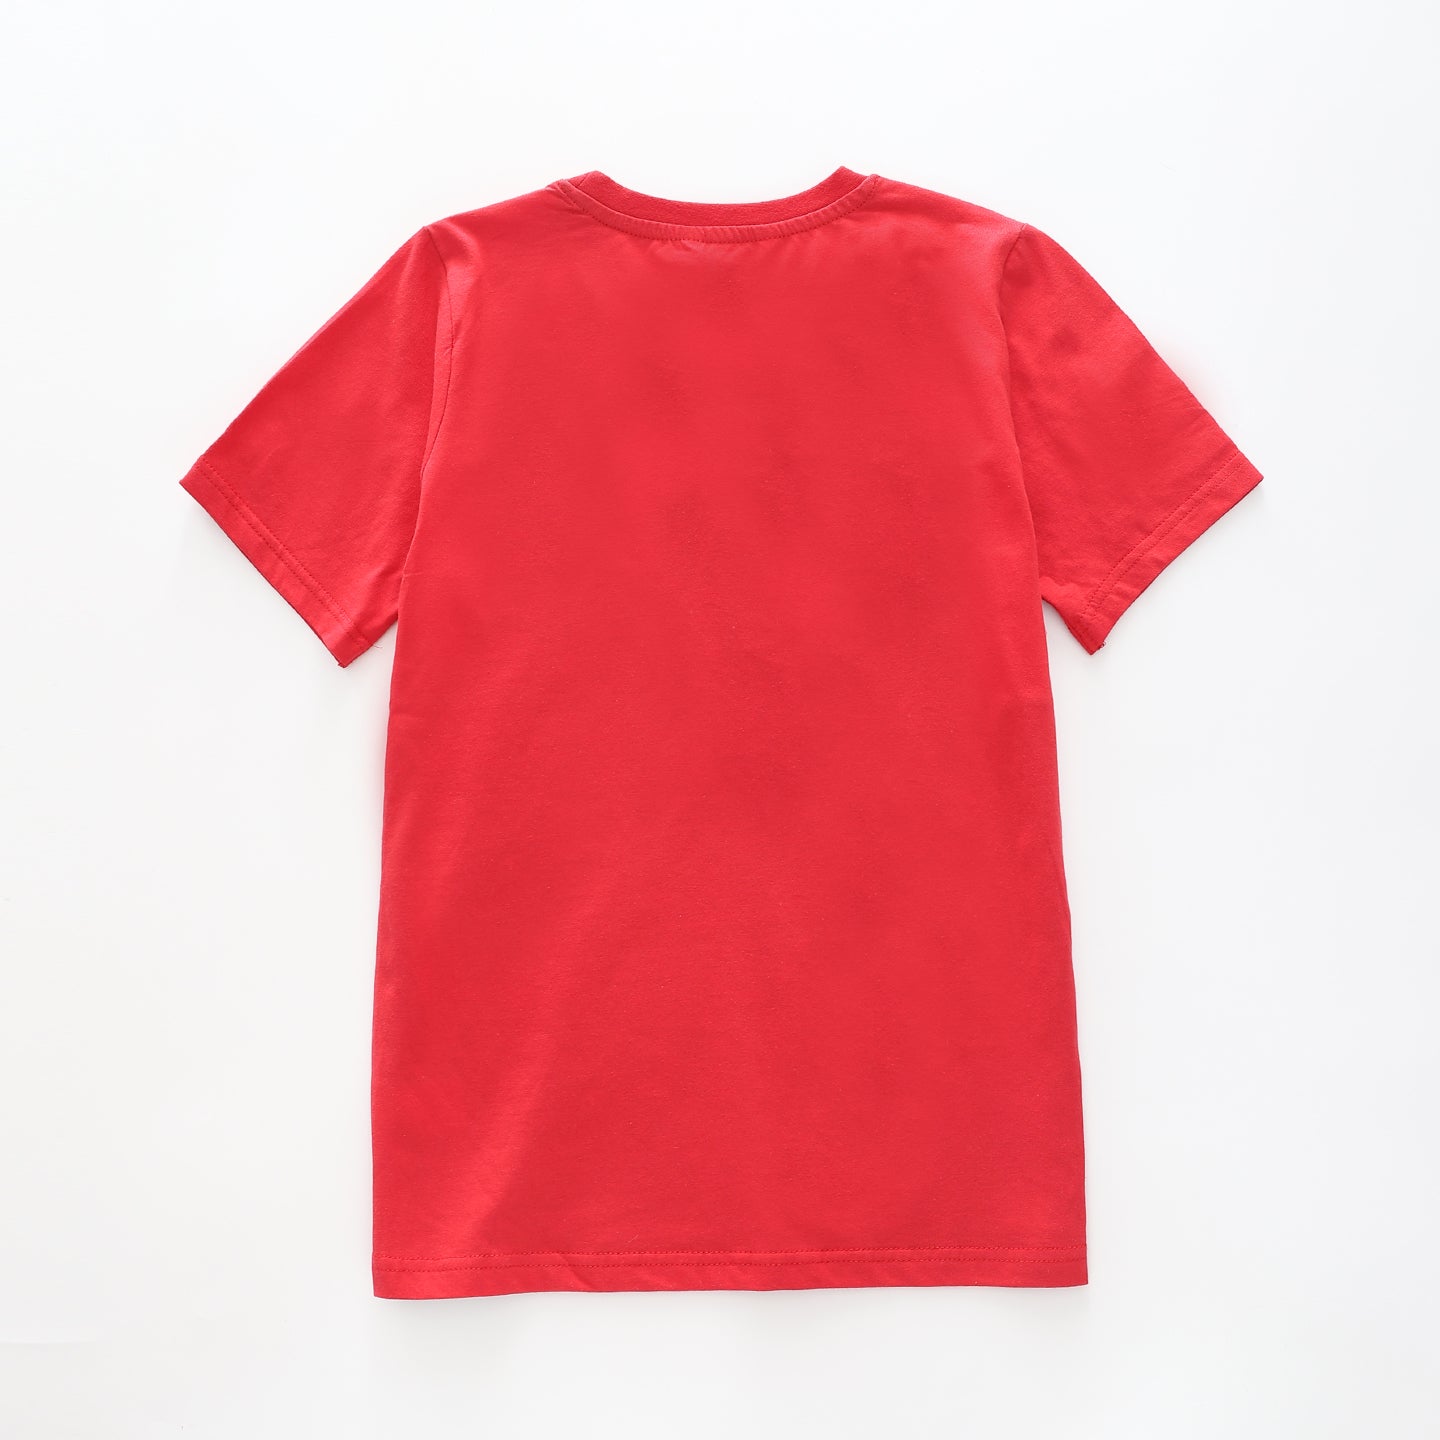 Boy's Navy Blue and Red Large Stripe T-Shirt